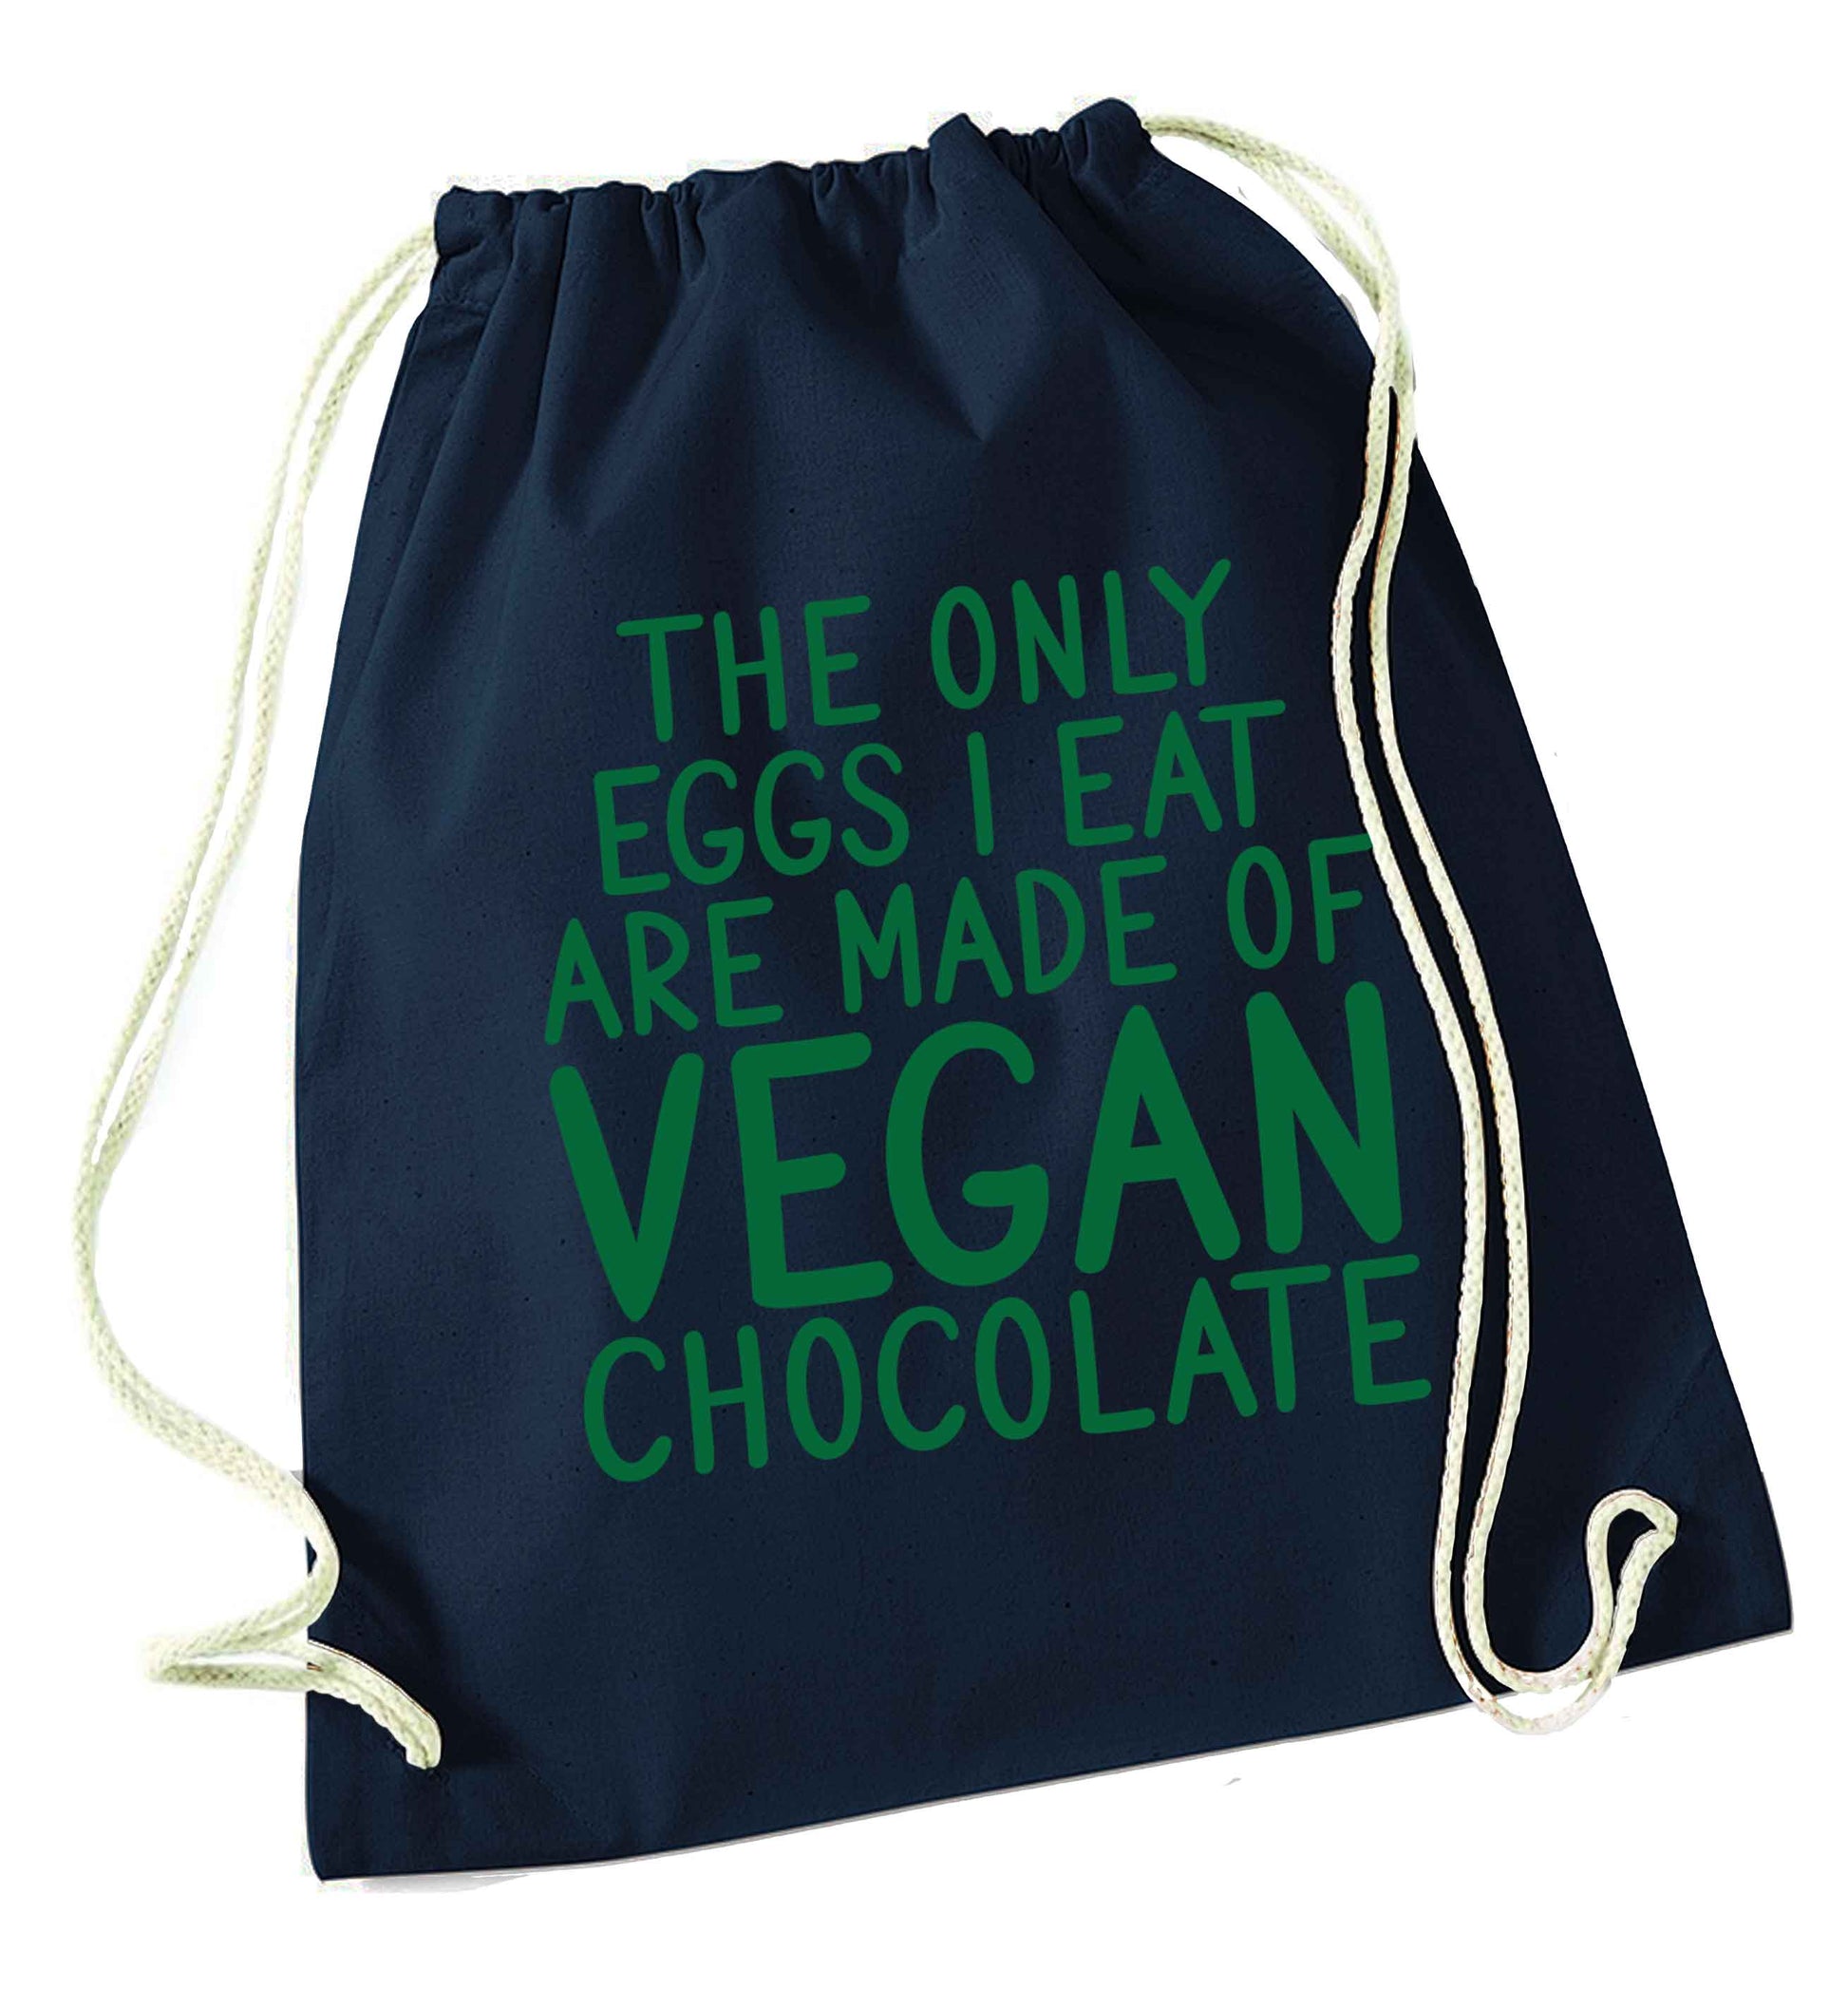 The only eggs I eat are made of vegan chocolate navy drawstring bag